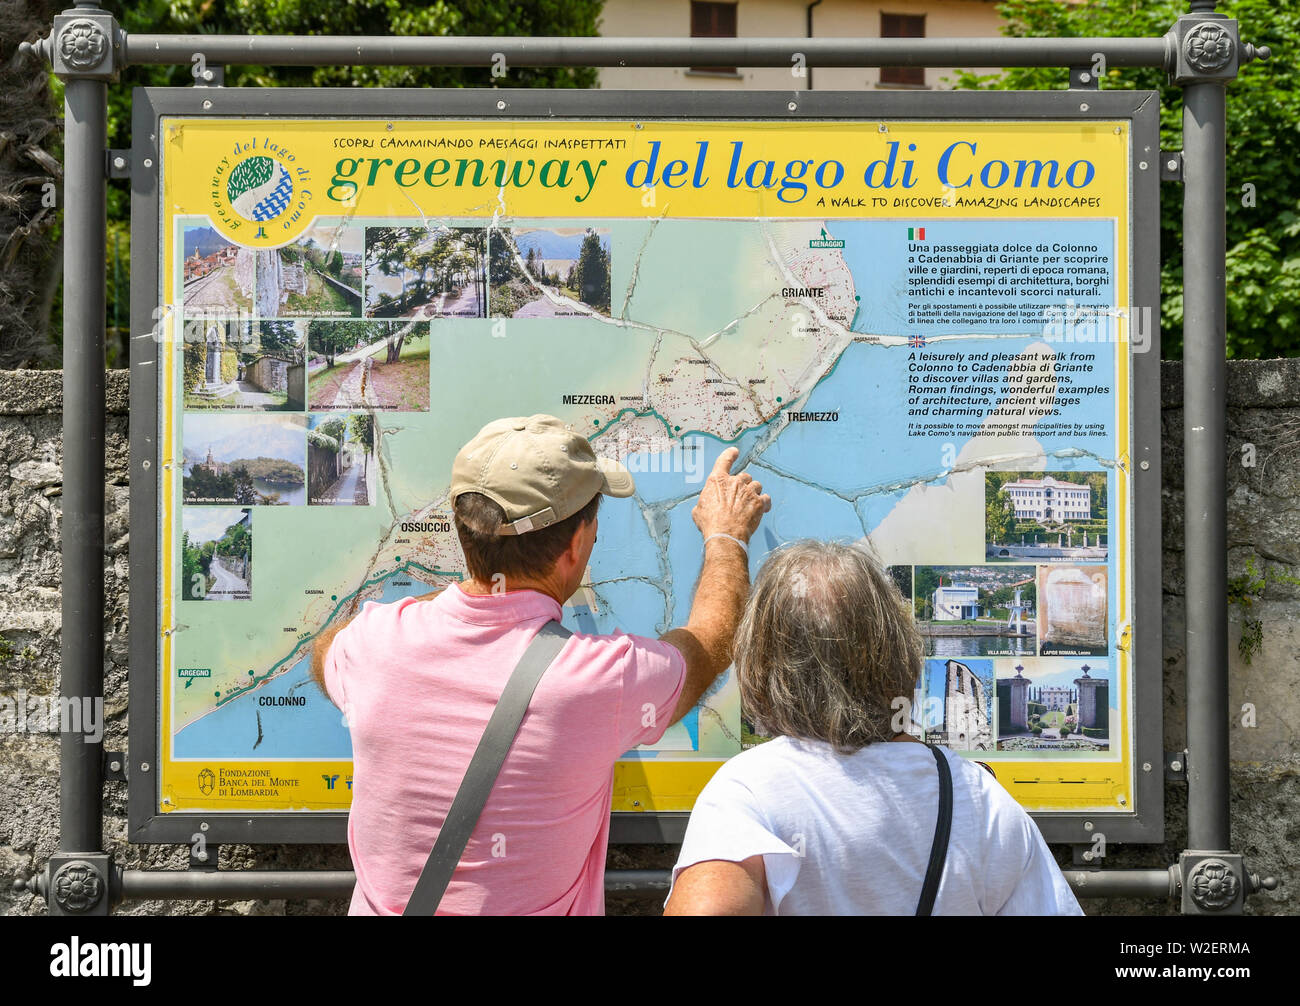 Lenno Lake Como Italy June 19 People Looking At A Map Of The Greenway Del Lago Di Como In Lenno On Lake Como The Greenway Is A Walking Route Stock Photo Alamy